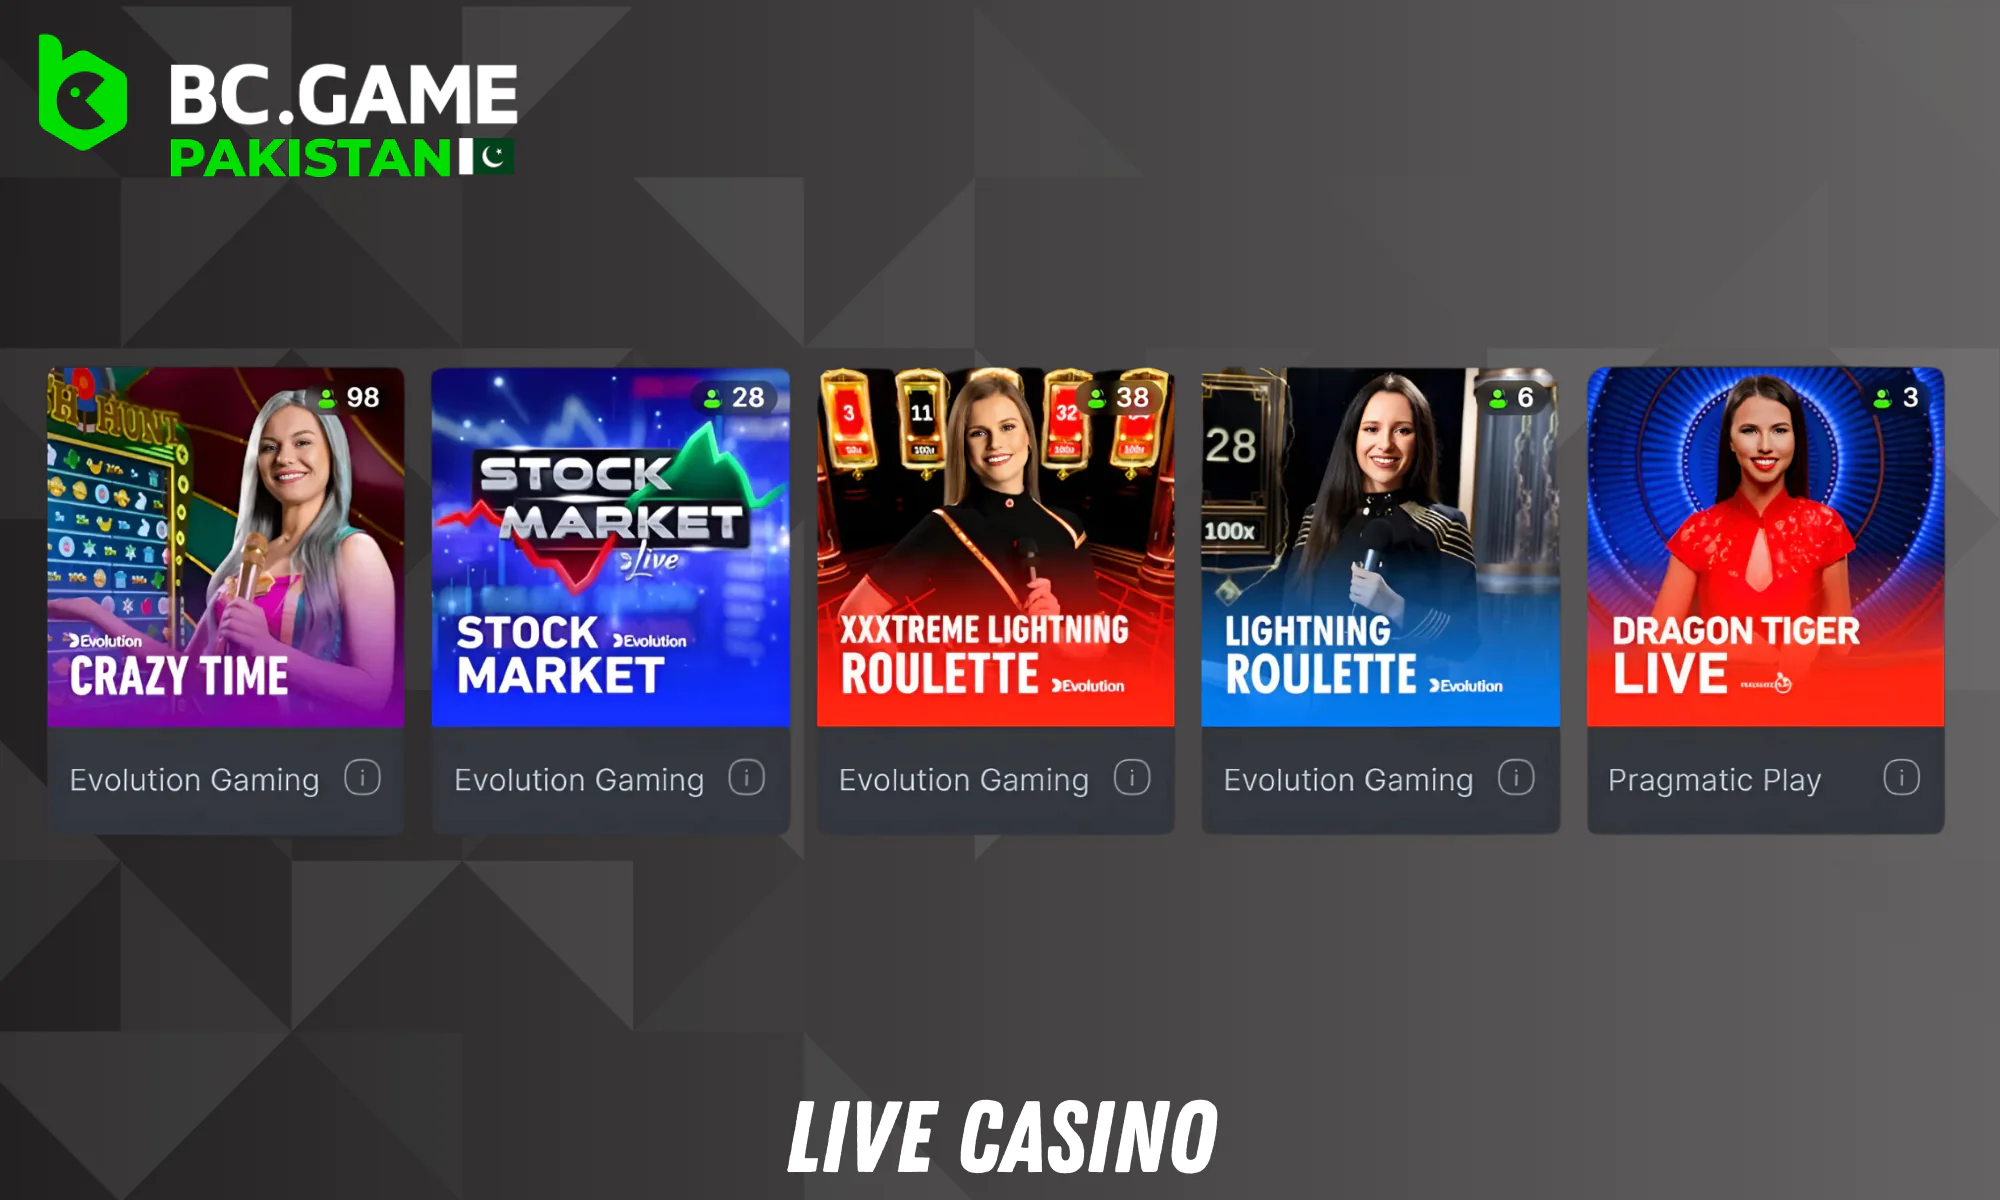 BC Game immerses players in a realistic environment with a live casino online